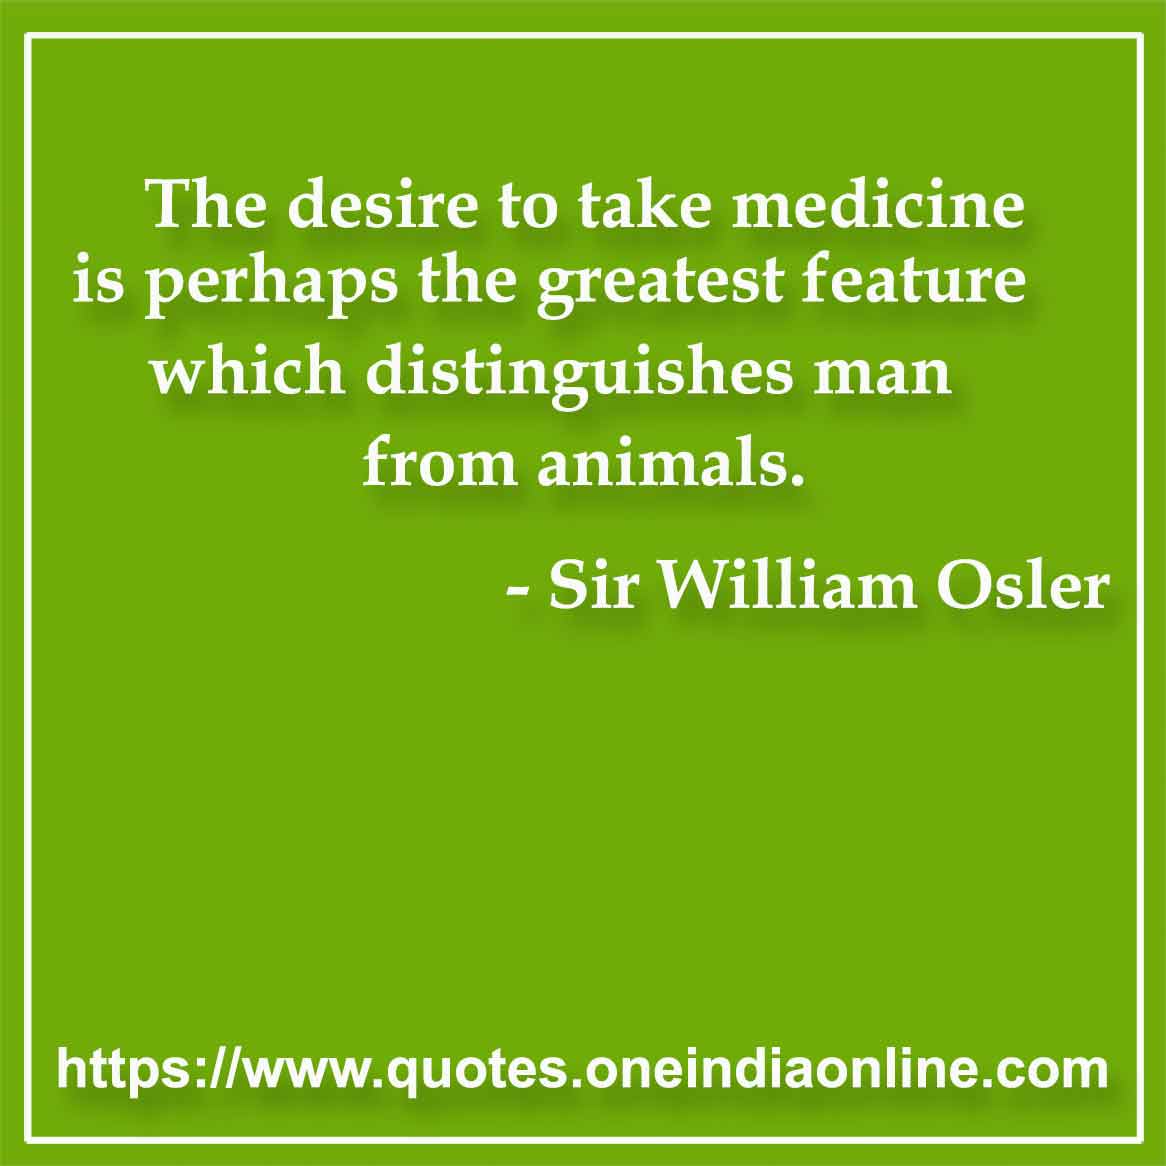 The desire to take medicine is perhaps the greatest feature which distinguishes man from animals.

- Medical Quotes by Sir William Osler 